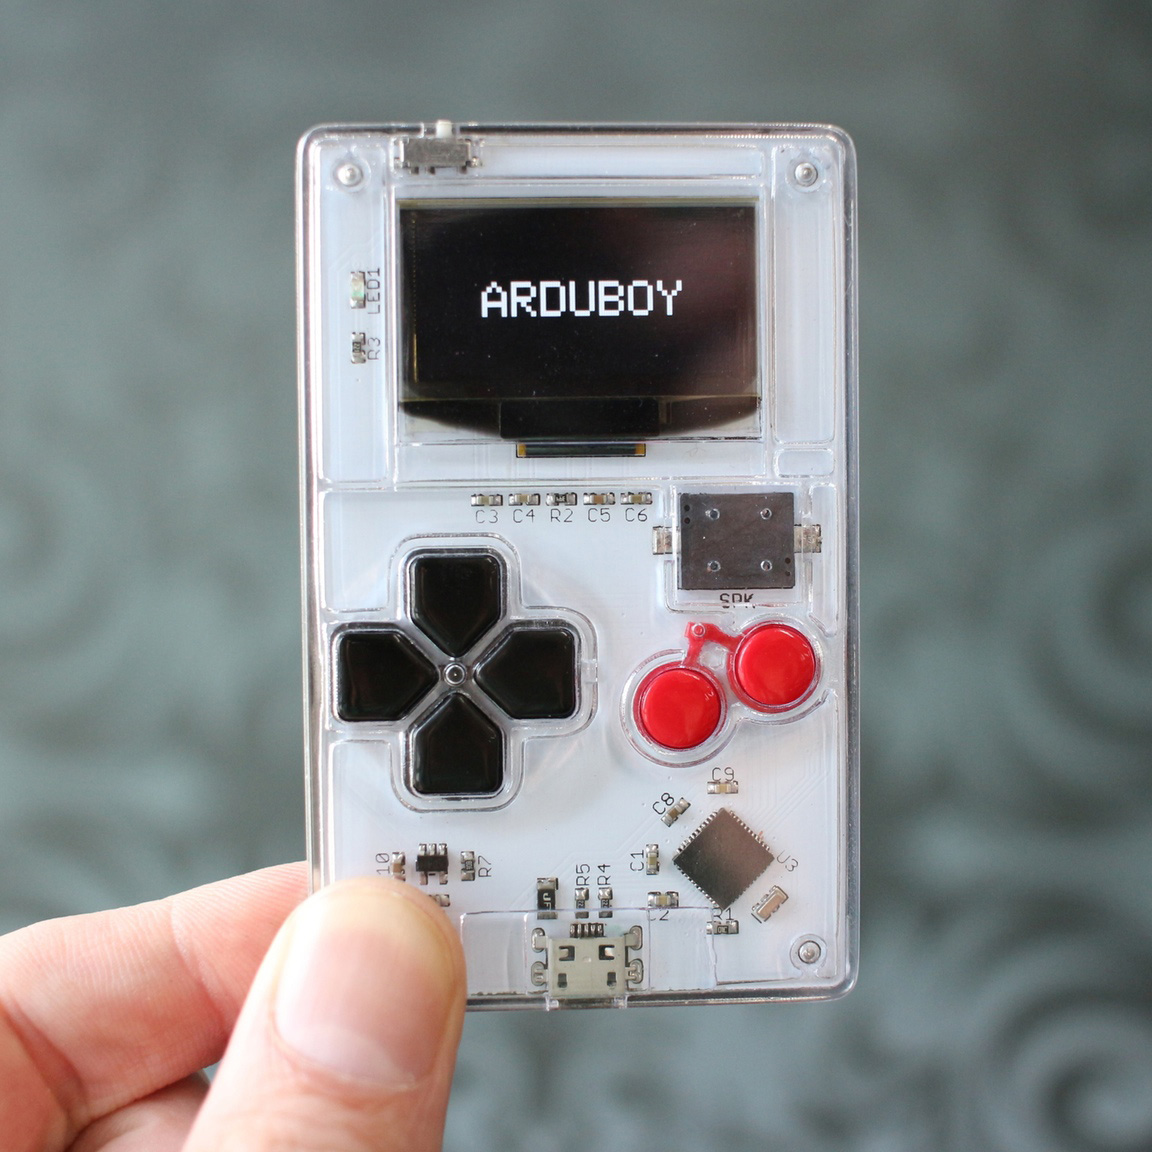 Arduboy: a credit card size game system with 8-bit look & feel 